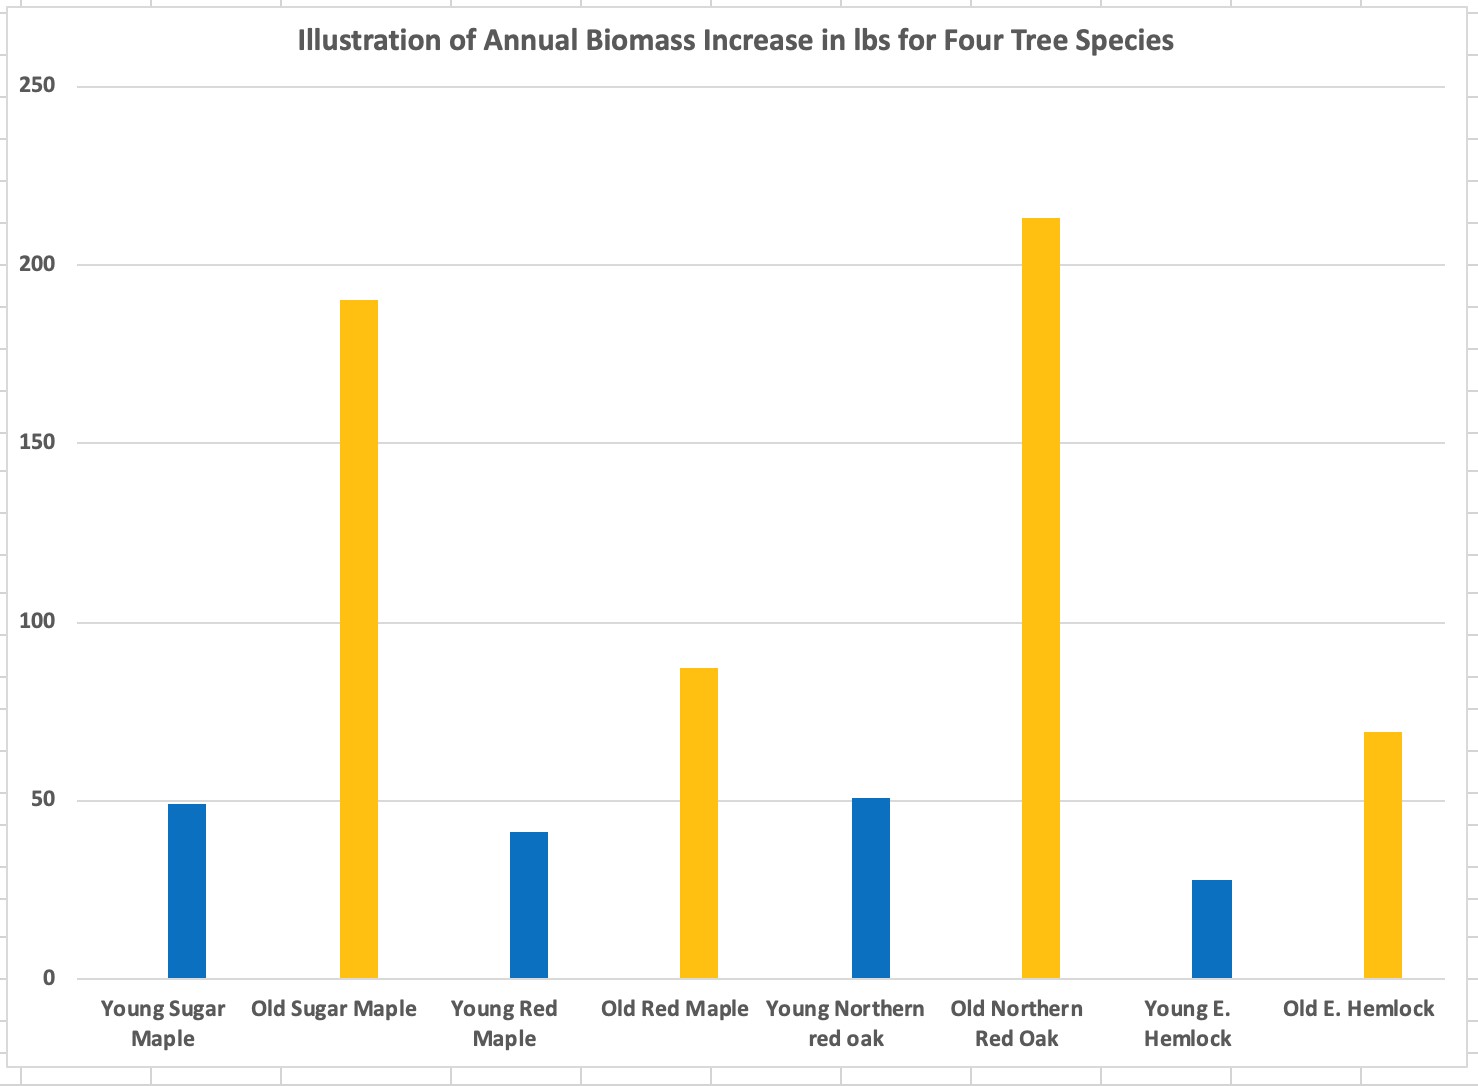 Illustration of annual biomass increase in pounds for four tree species